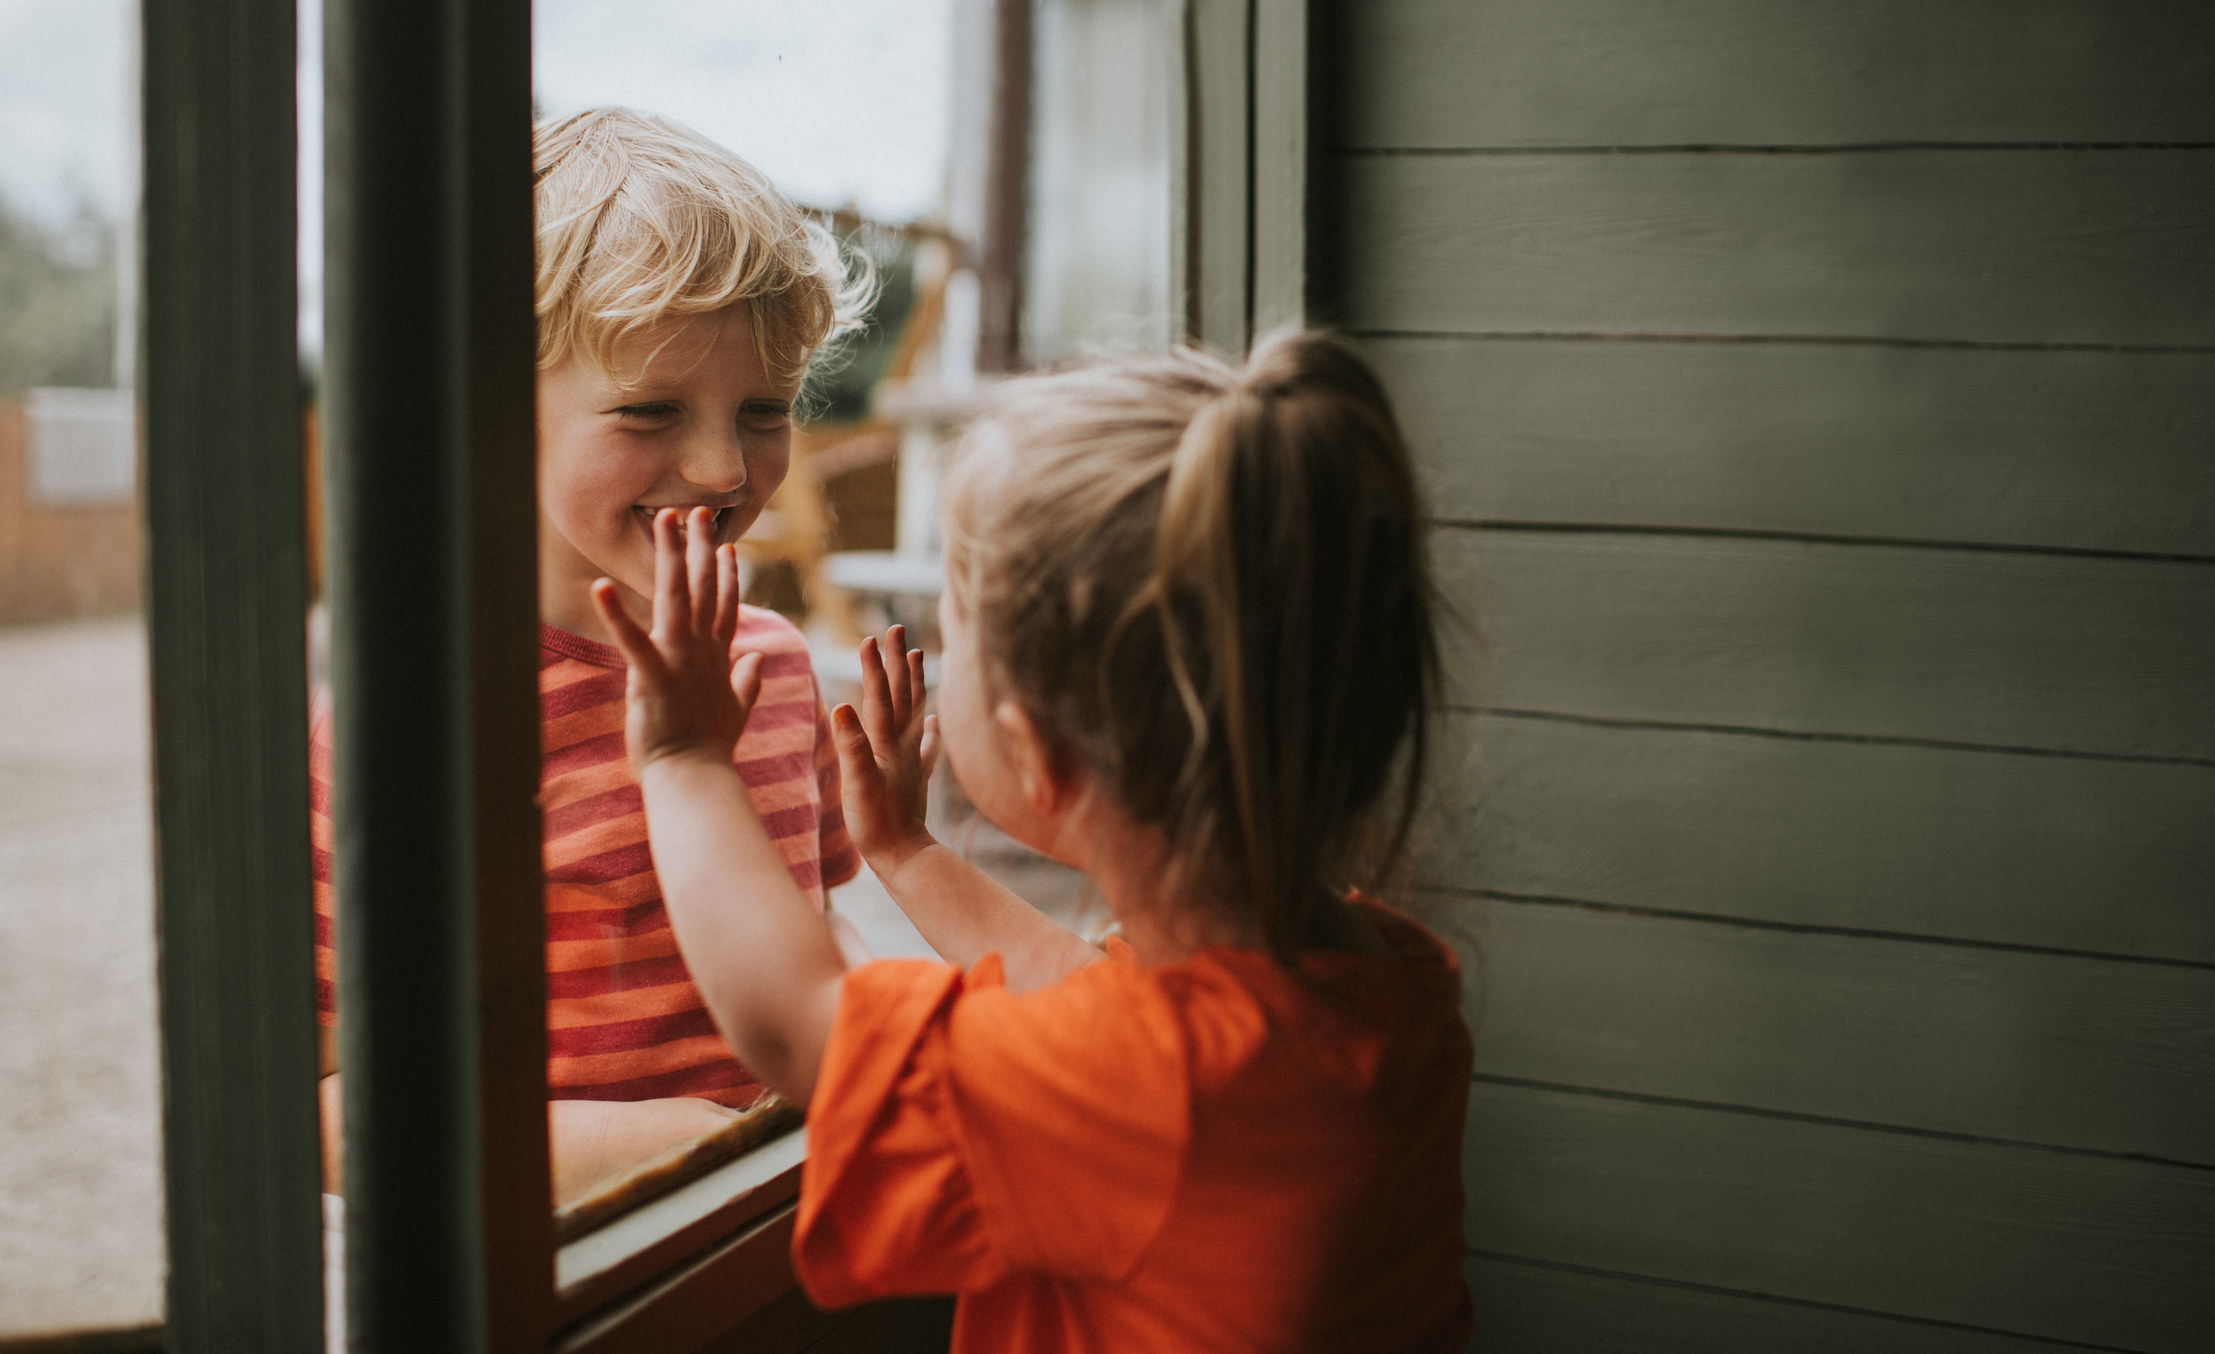 Two toddlers innocently smile at each other through a window